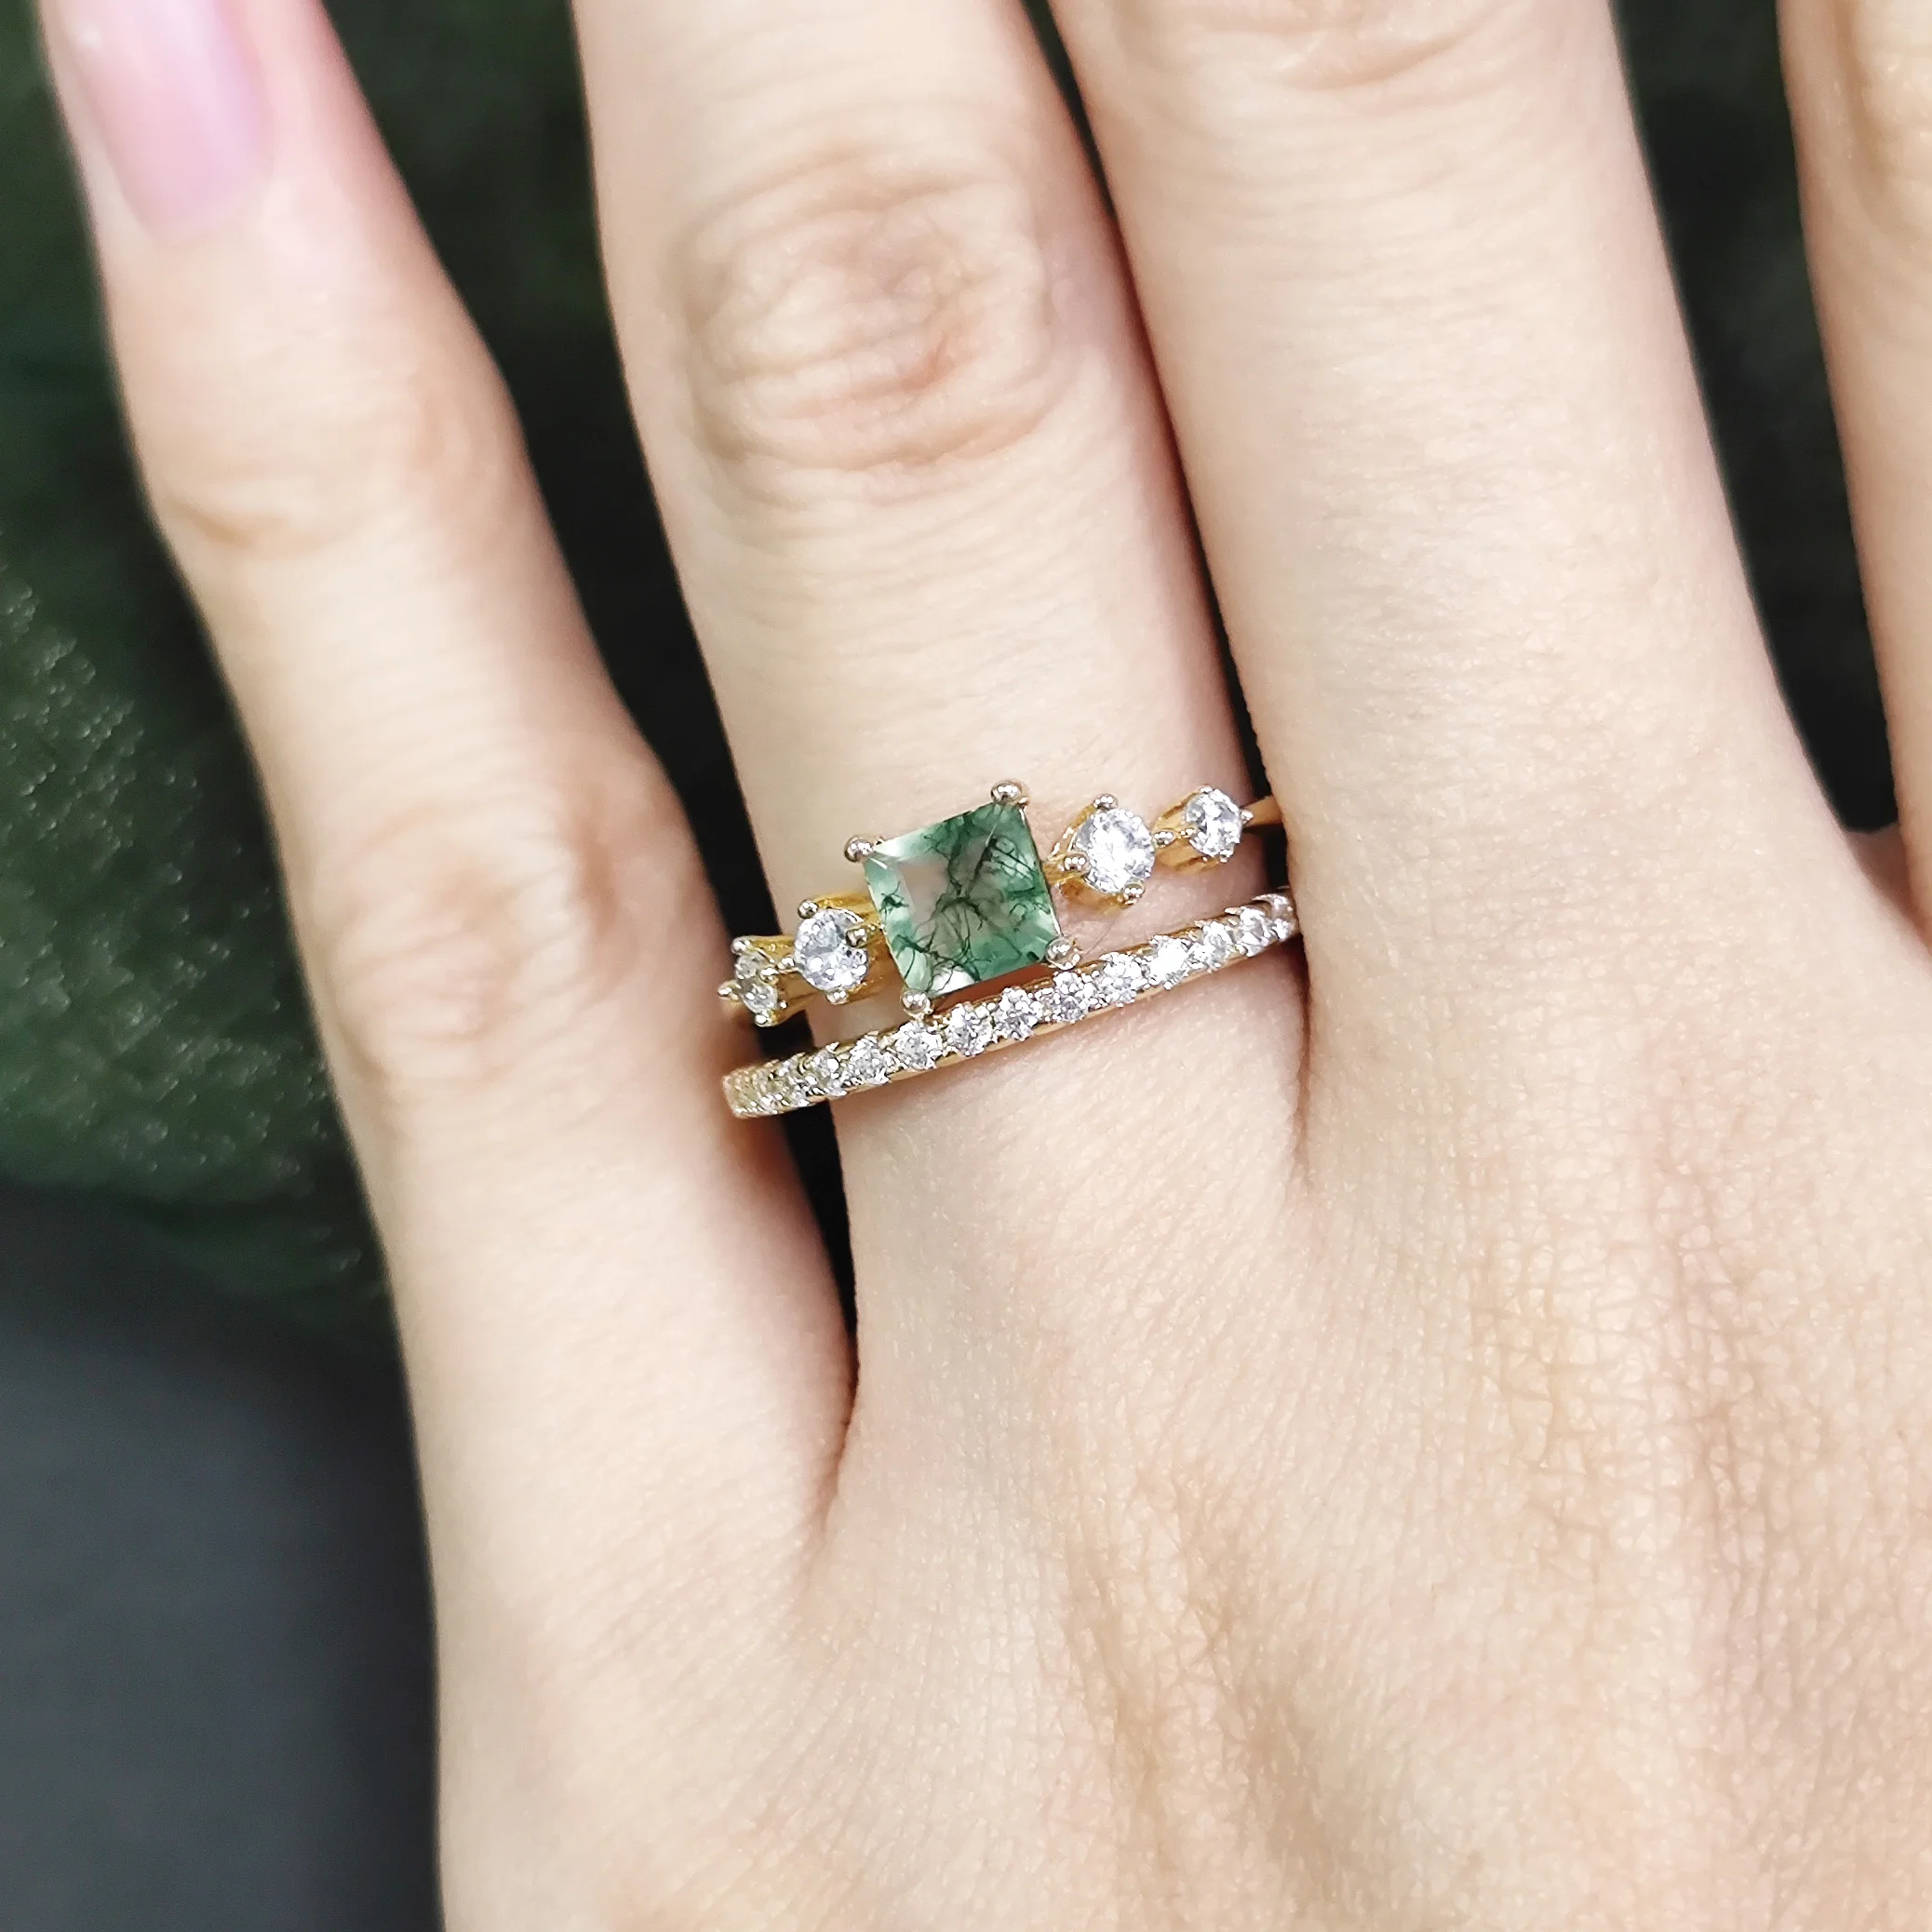 

Abiding Fine Jewelry 925 Pure Silver Stack Rings Set Square Cut Natural Green Moss Agate Wedding Dainty Stacking Ring